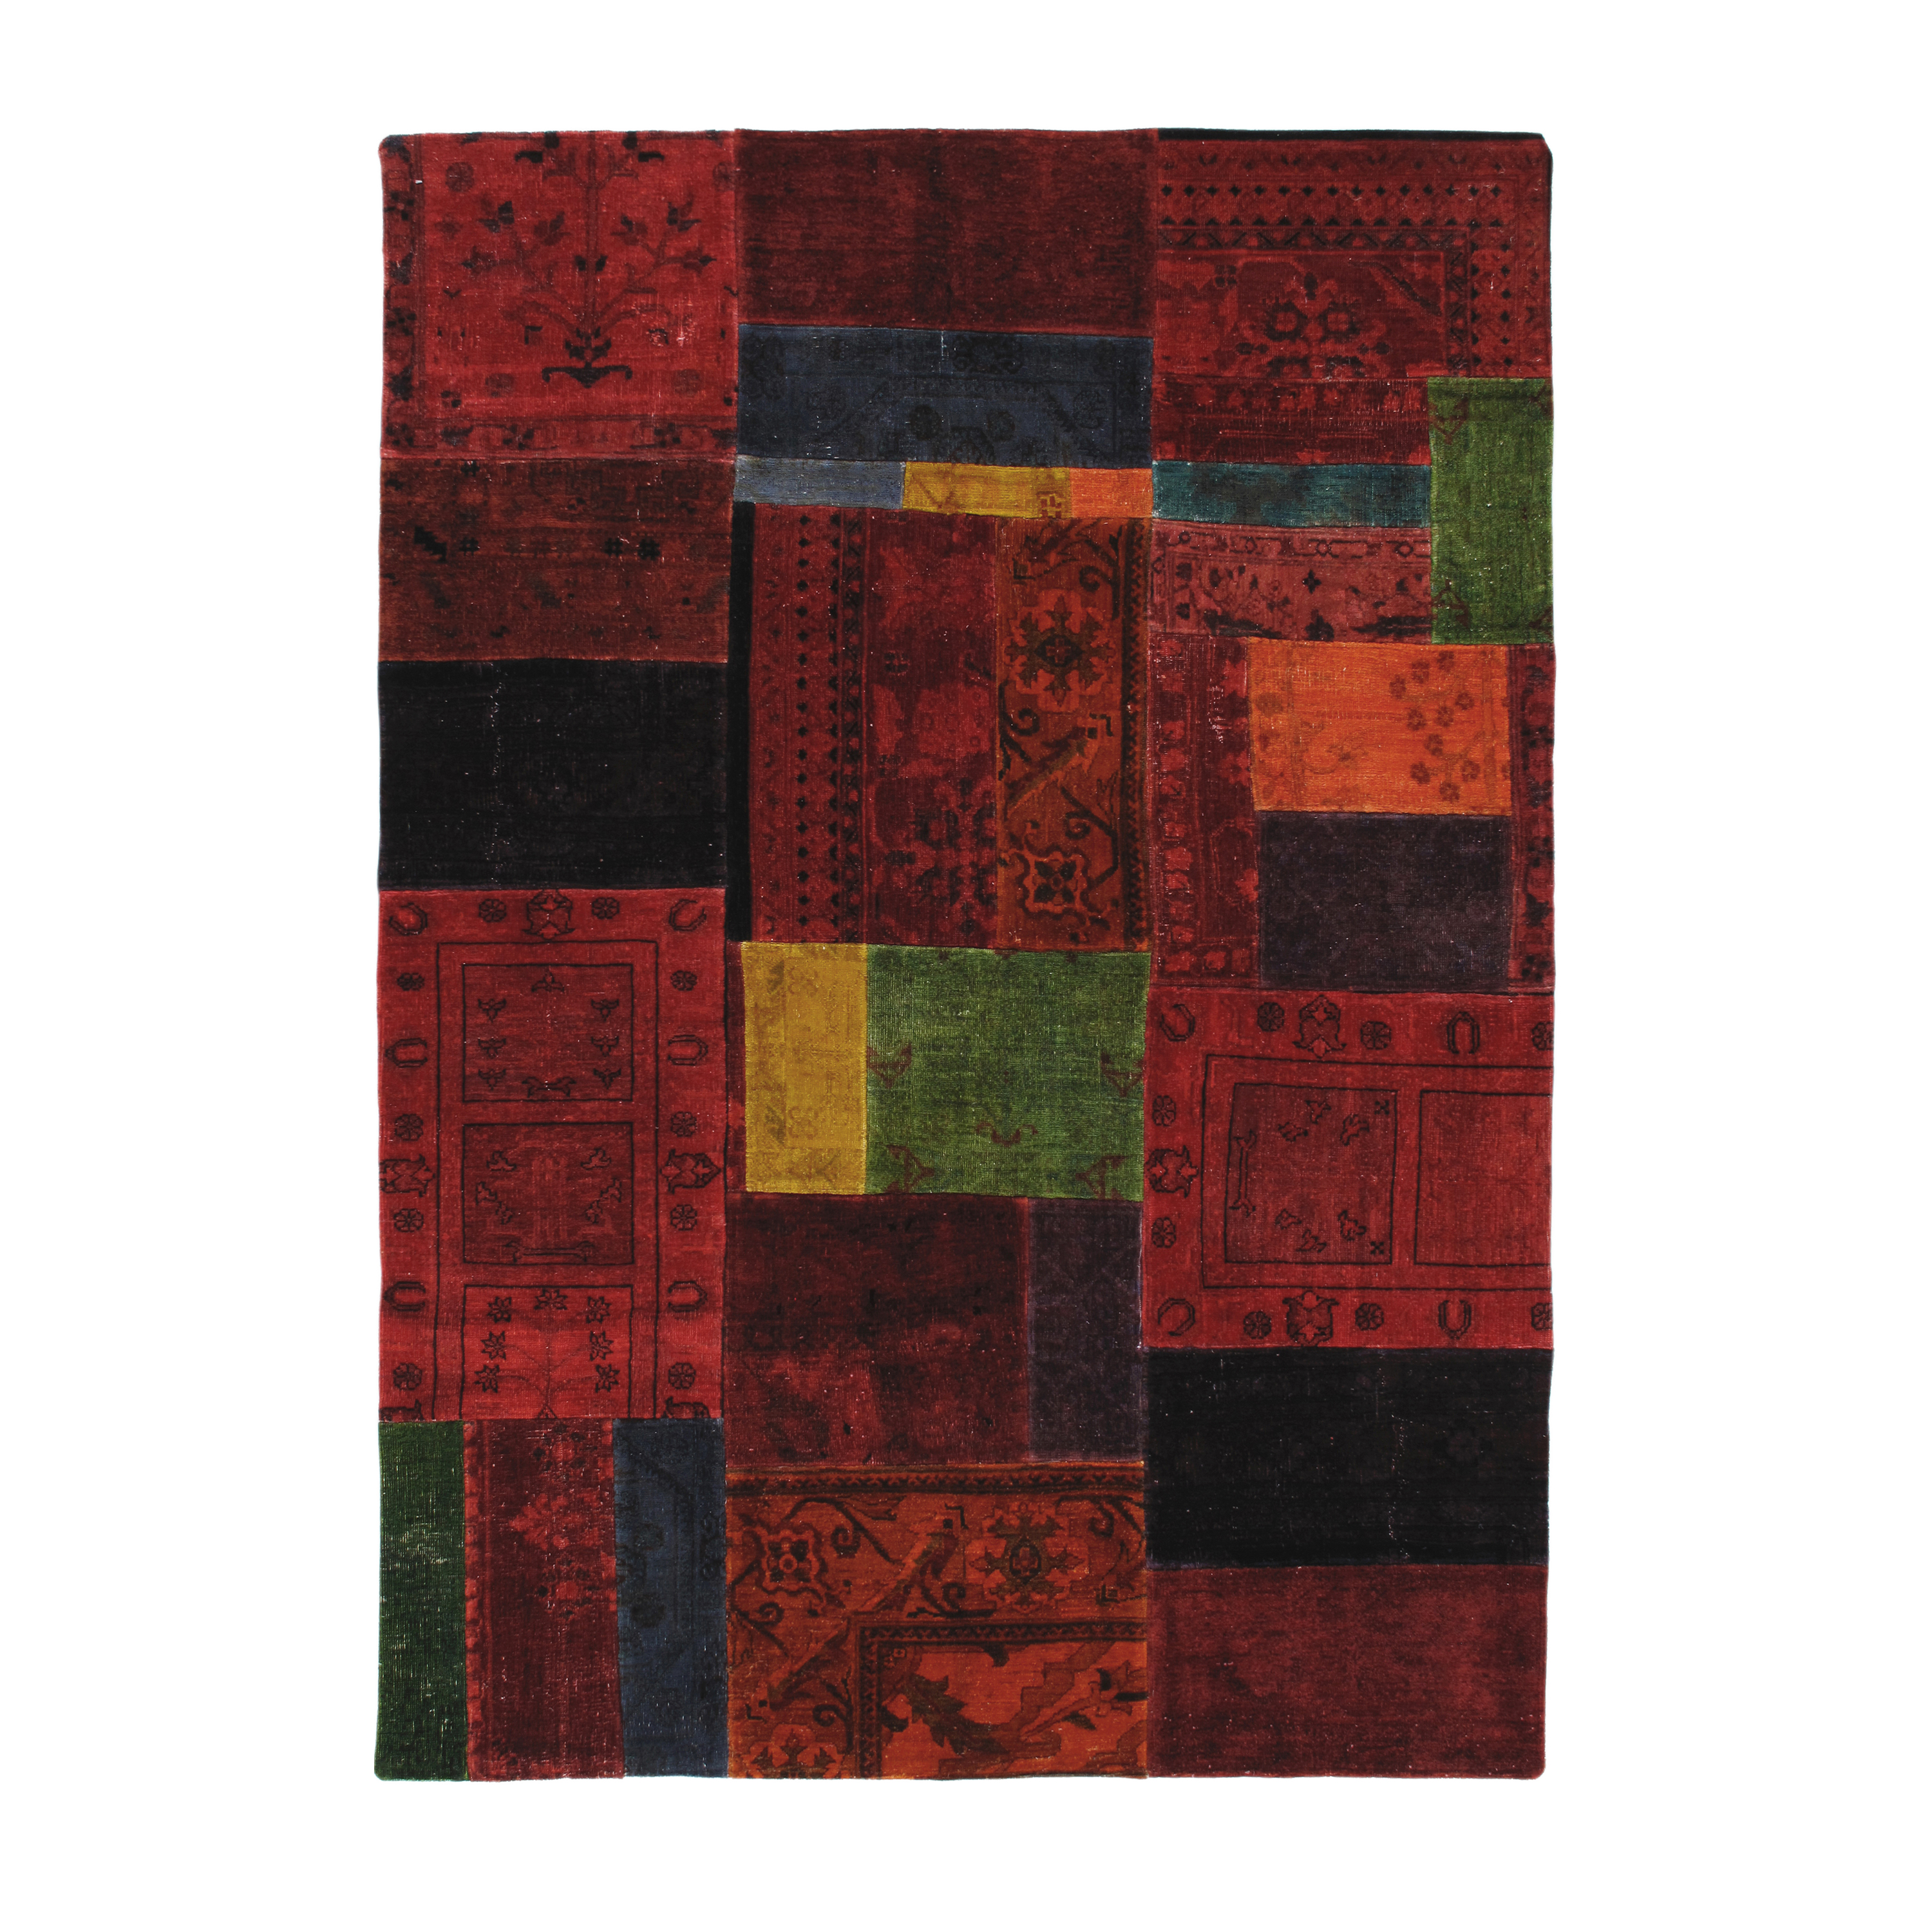 This Patchwork is composed from various hand-knotted pieces that are hand-stitched together to form a patchwork rug. 